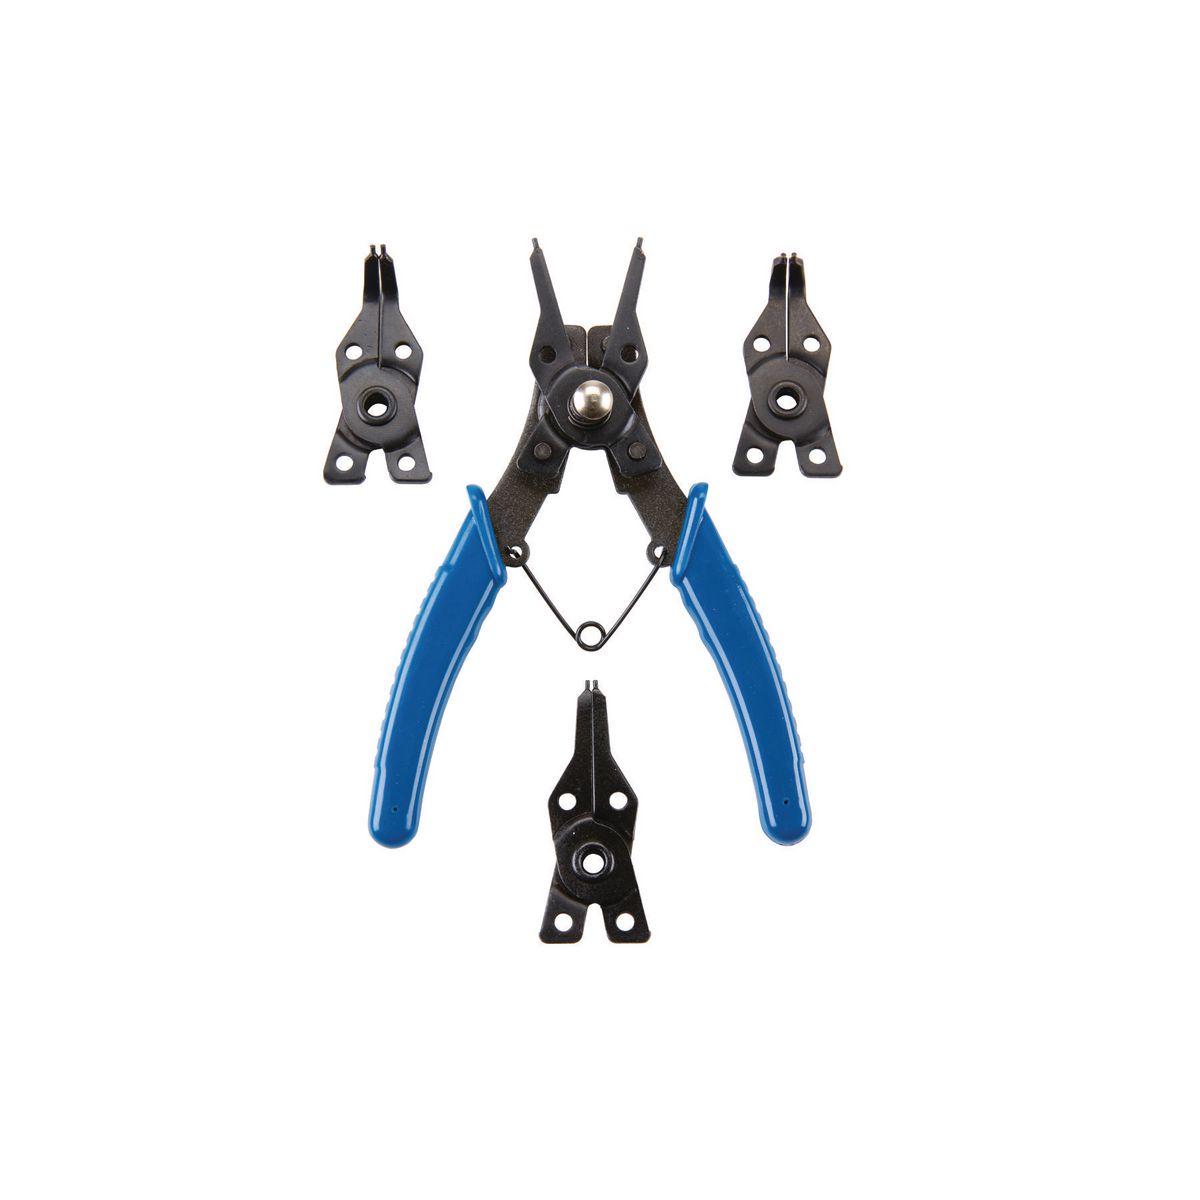 PITTSBURGH Snap Ring Pliers with Interchangeable Heads - Item 63845